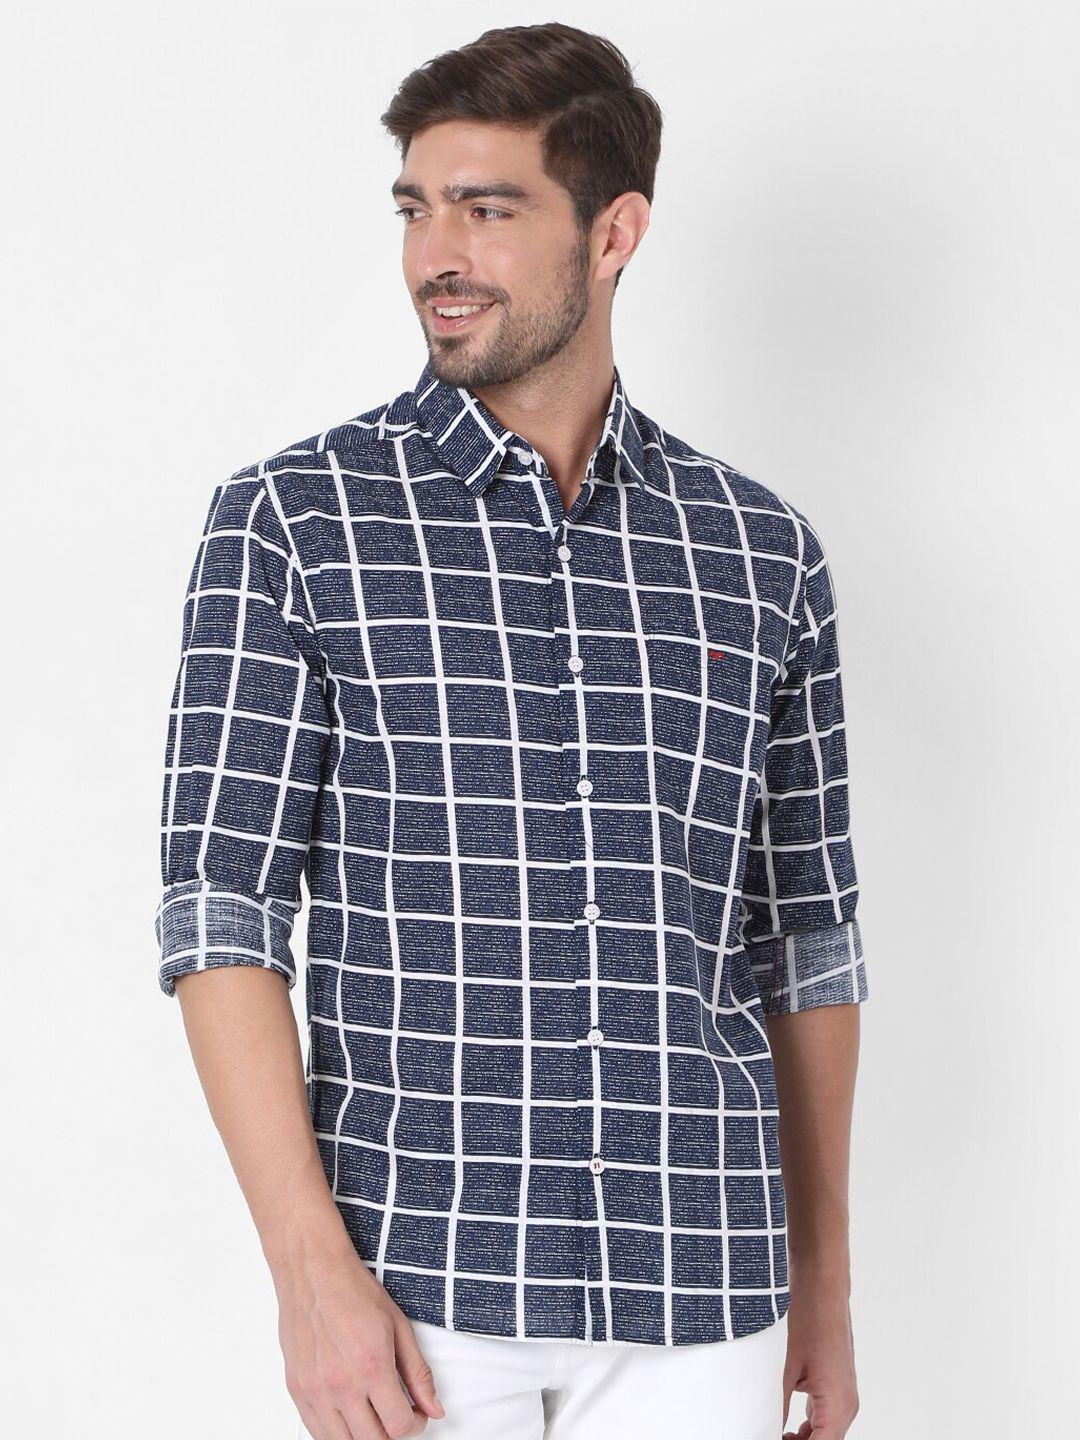 mufti-men-navy-blue-&-white-slim-fit-checked-cotton-casual-shirt